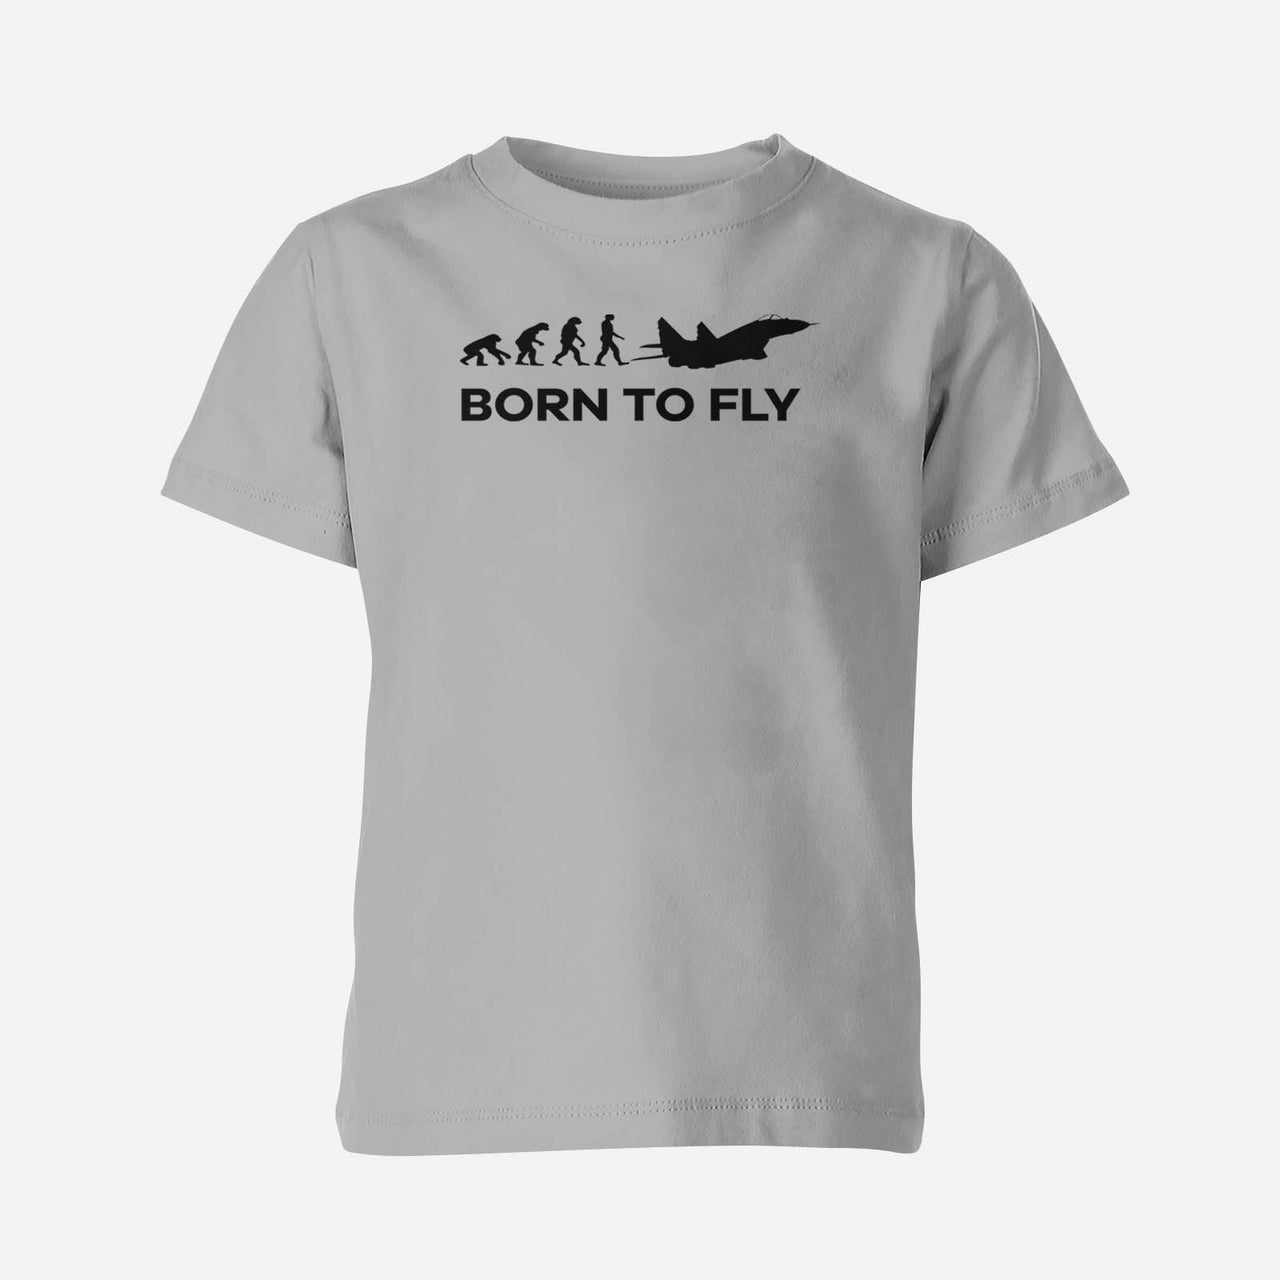 Born To Fly Military Designed Children T-Shirts